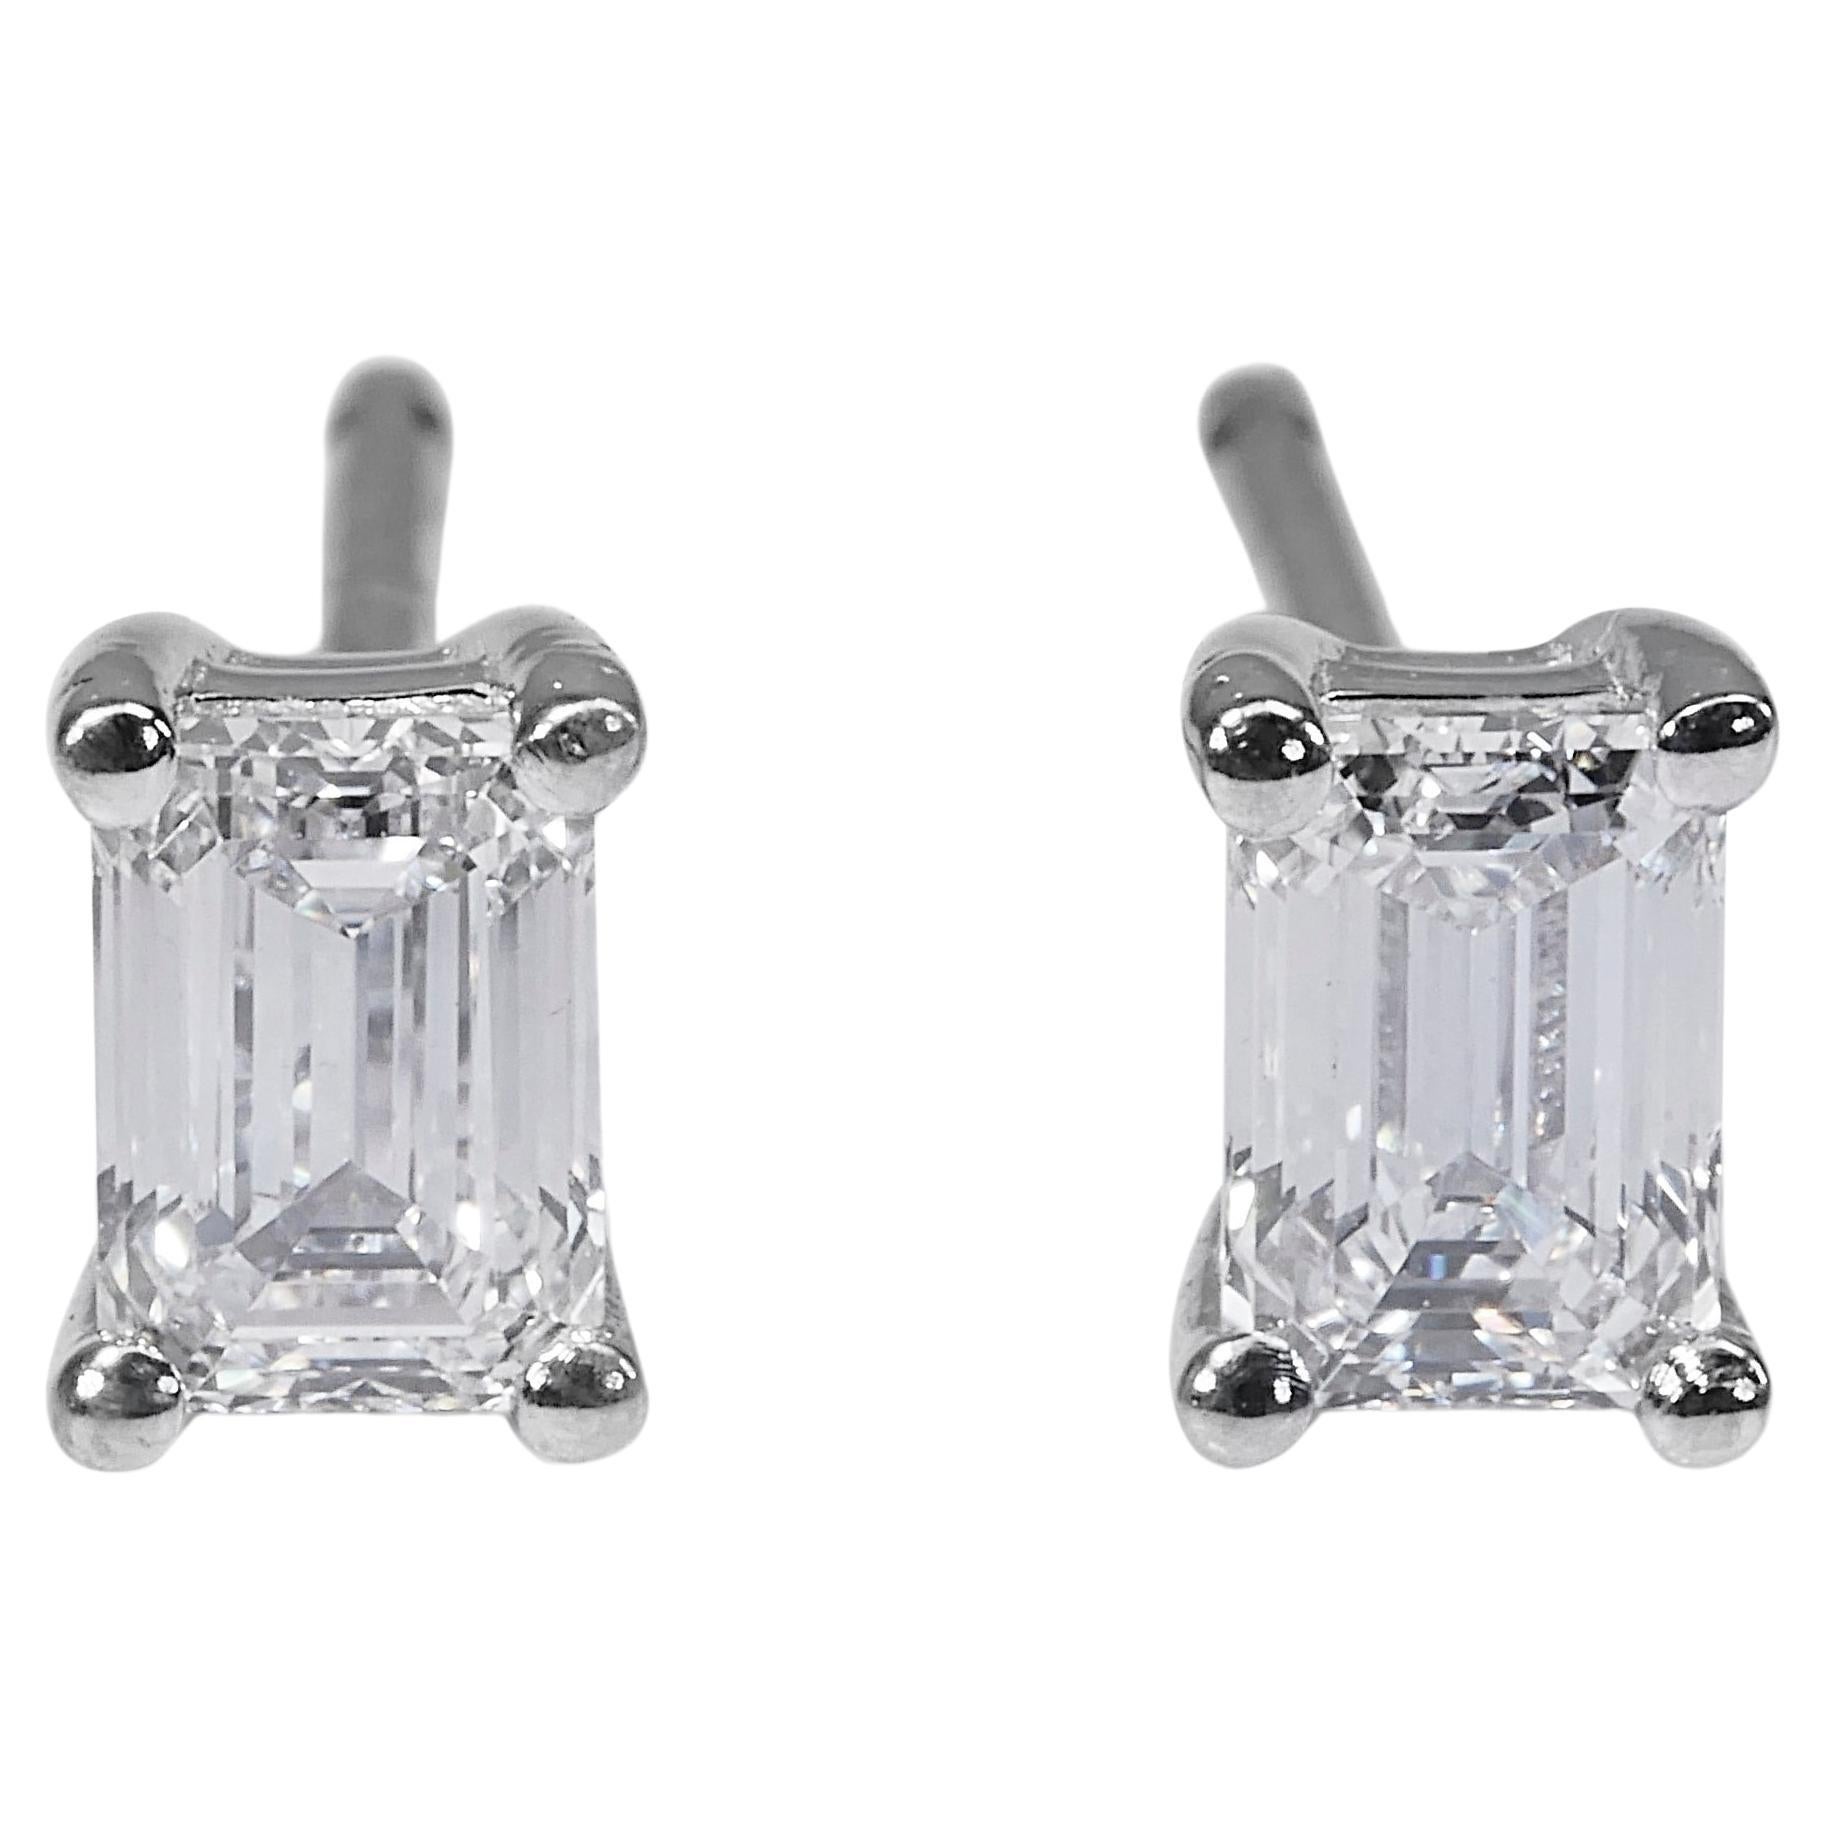 Timeless 2.02ct Diamond Stud Earrings in 18k White Gold - GIA Certified For Sale